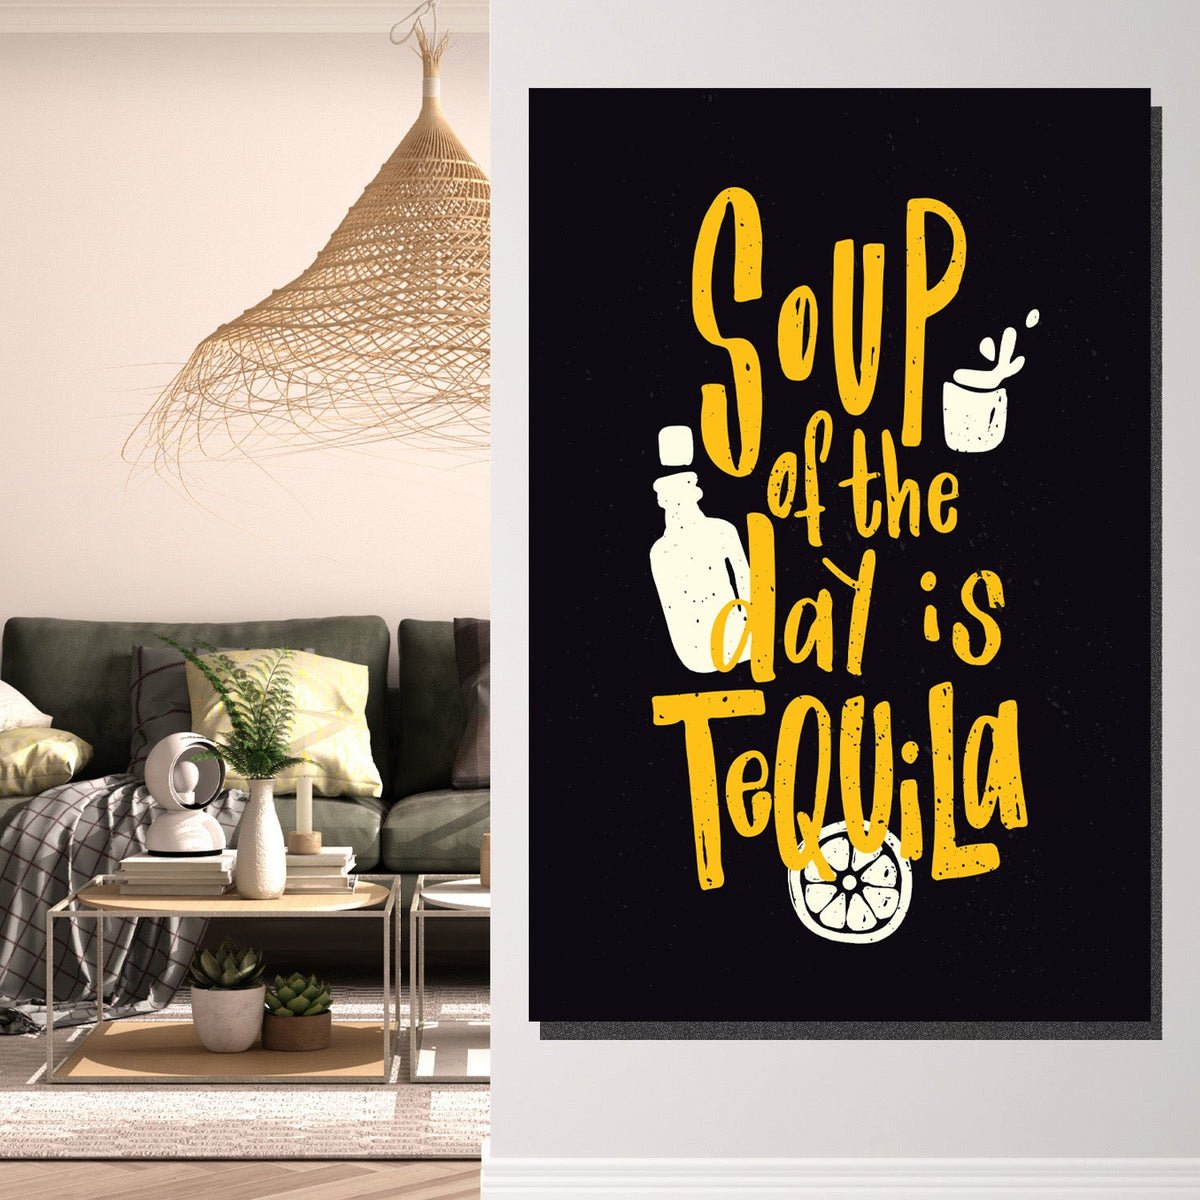 https://cdn.shopify.com/s/files/1/0387/9986/8044/products/SoupoftheDayCanvasArtprintStretched-2.jpg